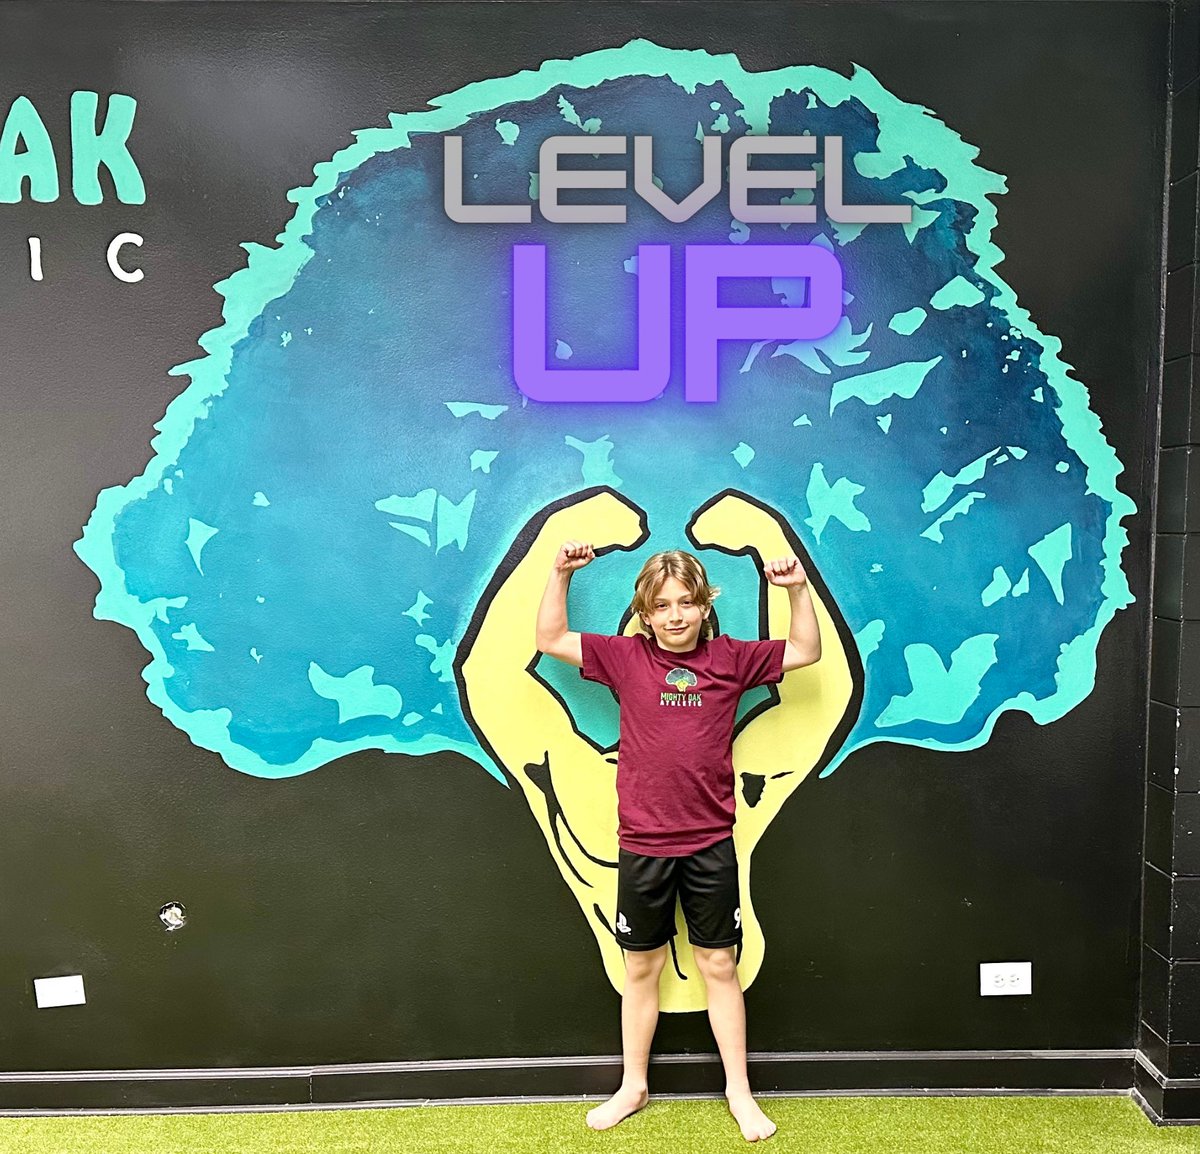 Massive shoutout to Max for hitting Level 6 - 🟣 in his strength journey! 8 months of relentless effort are paying off, both in the gym and on the ice with the Fury AAA hockey team. Max's dedication is a true inspiration. Keep dominating, Max! #Level6Achievement #HockeyExcellence